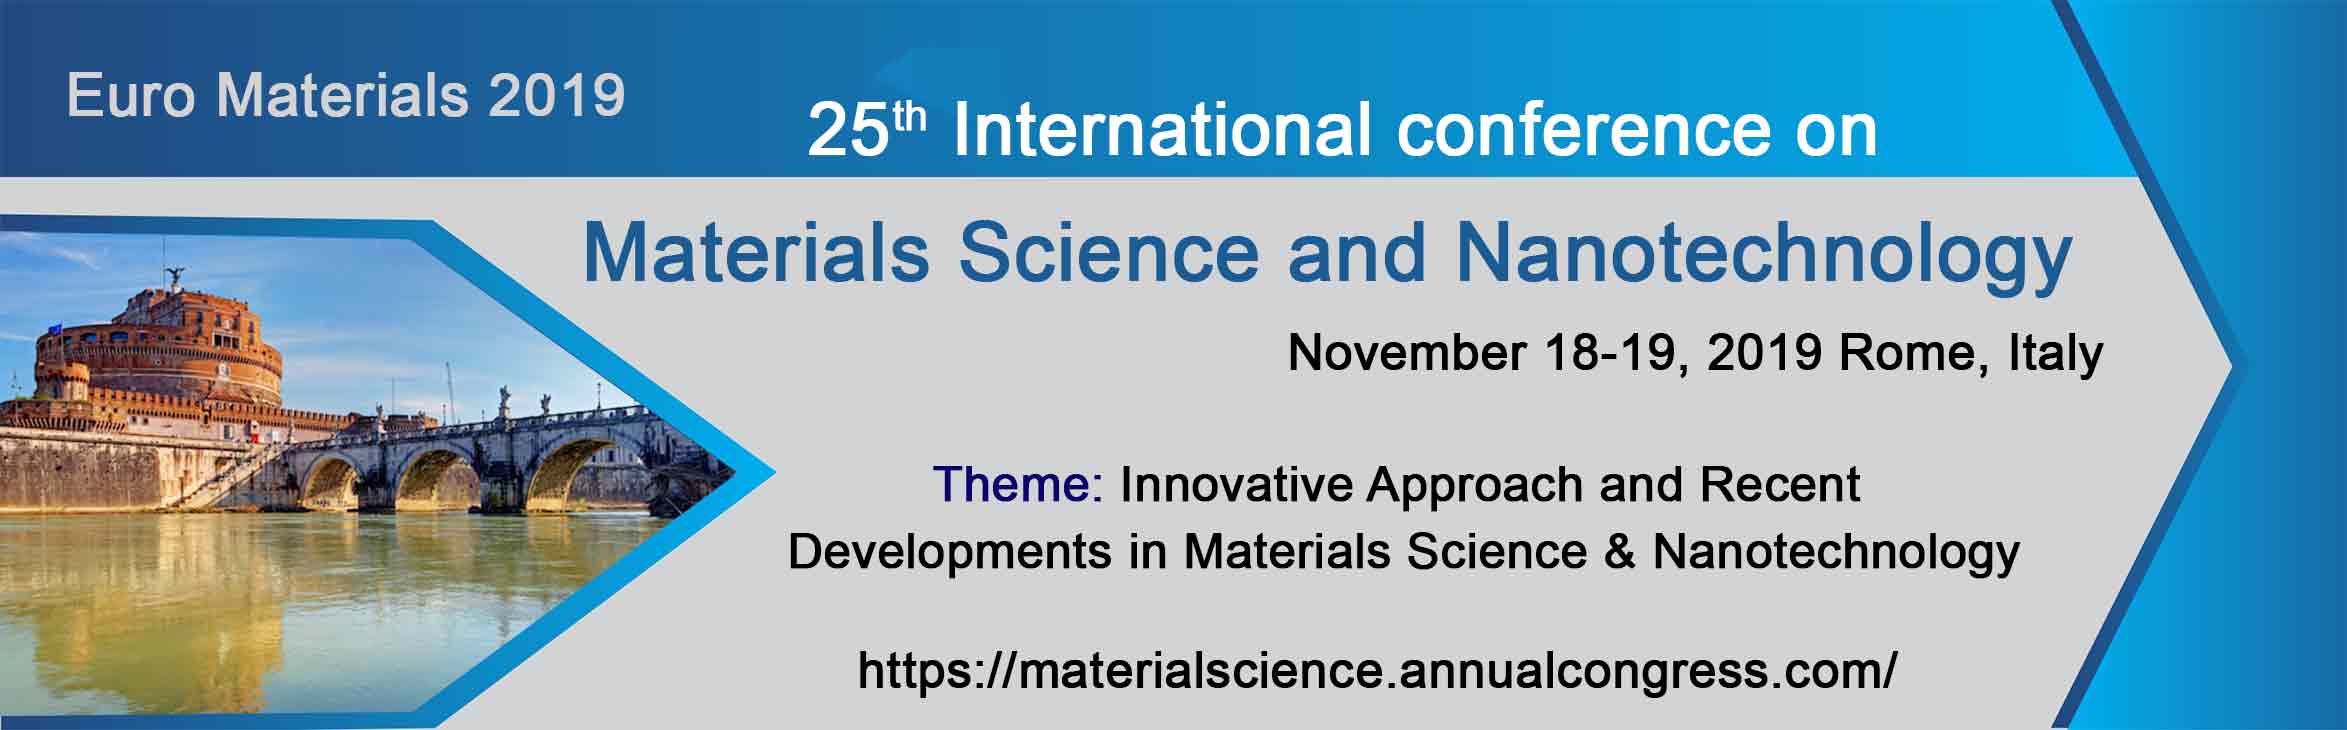 25th International conference on Materials Science and Nanotechnology, Rome, Lazio, Italy